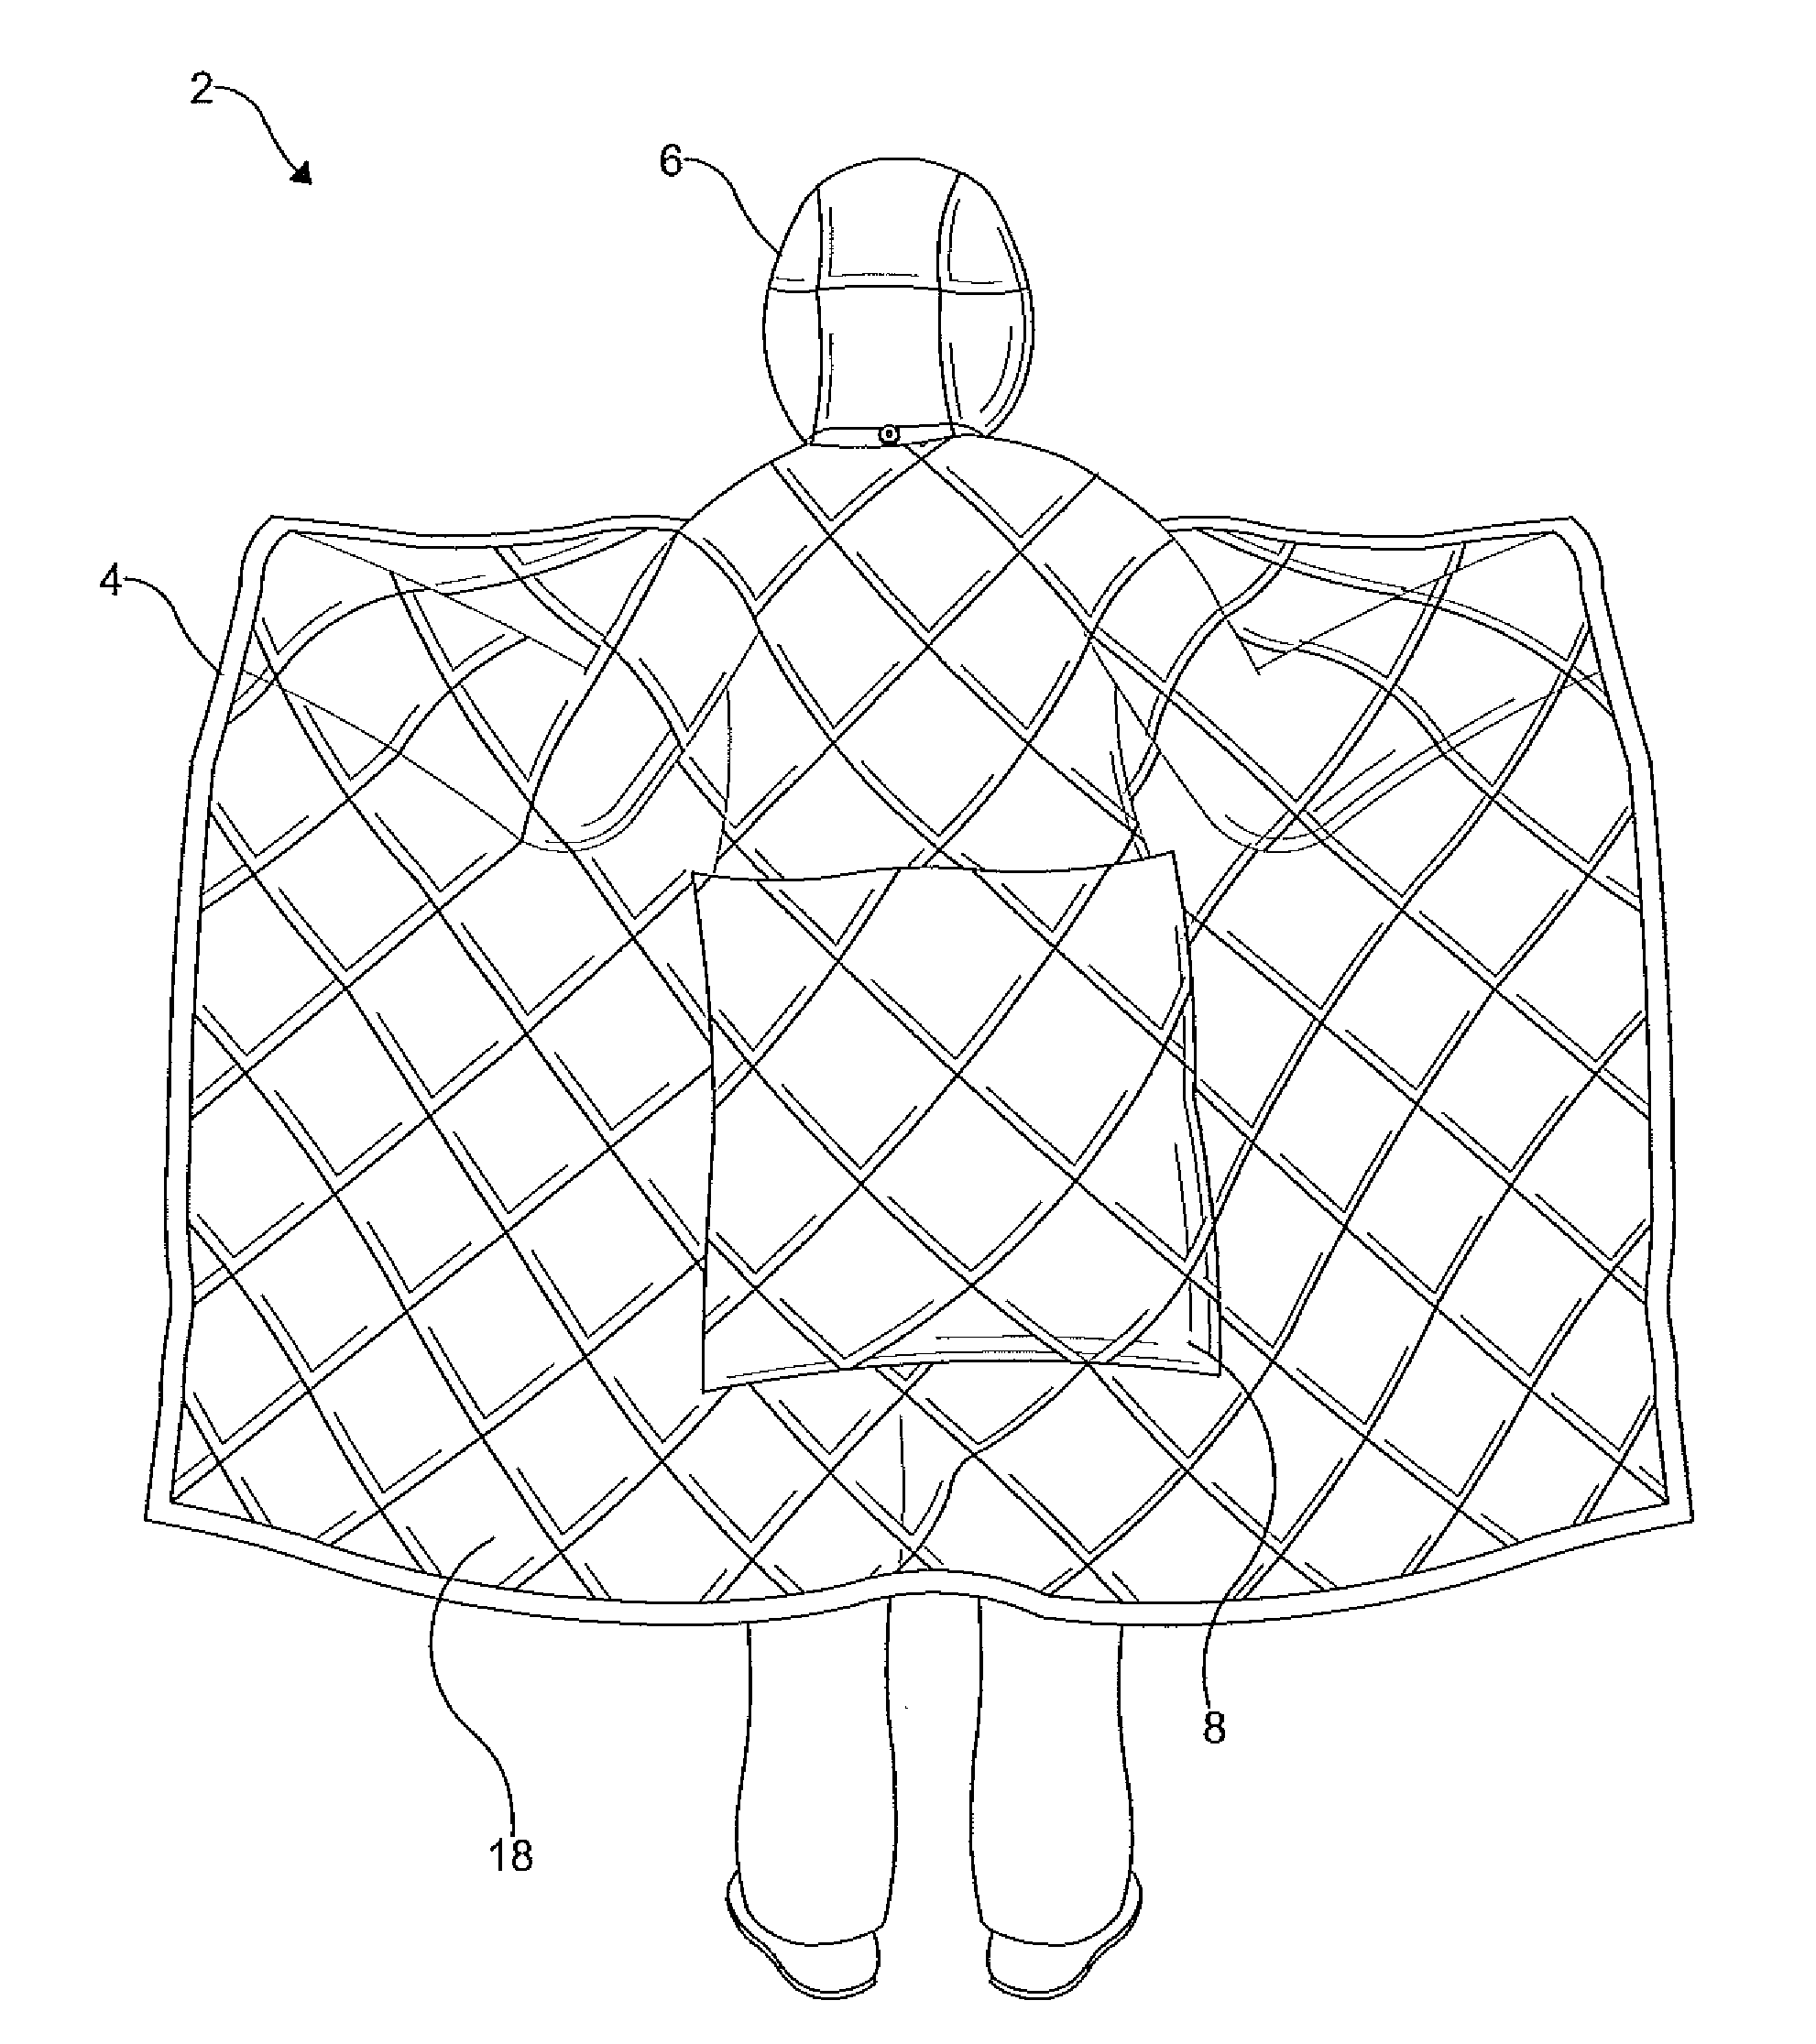 Garment for protection from the elements